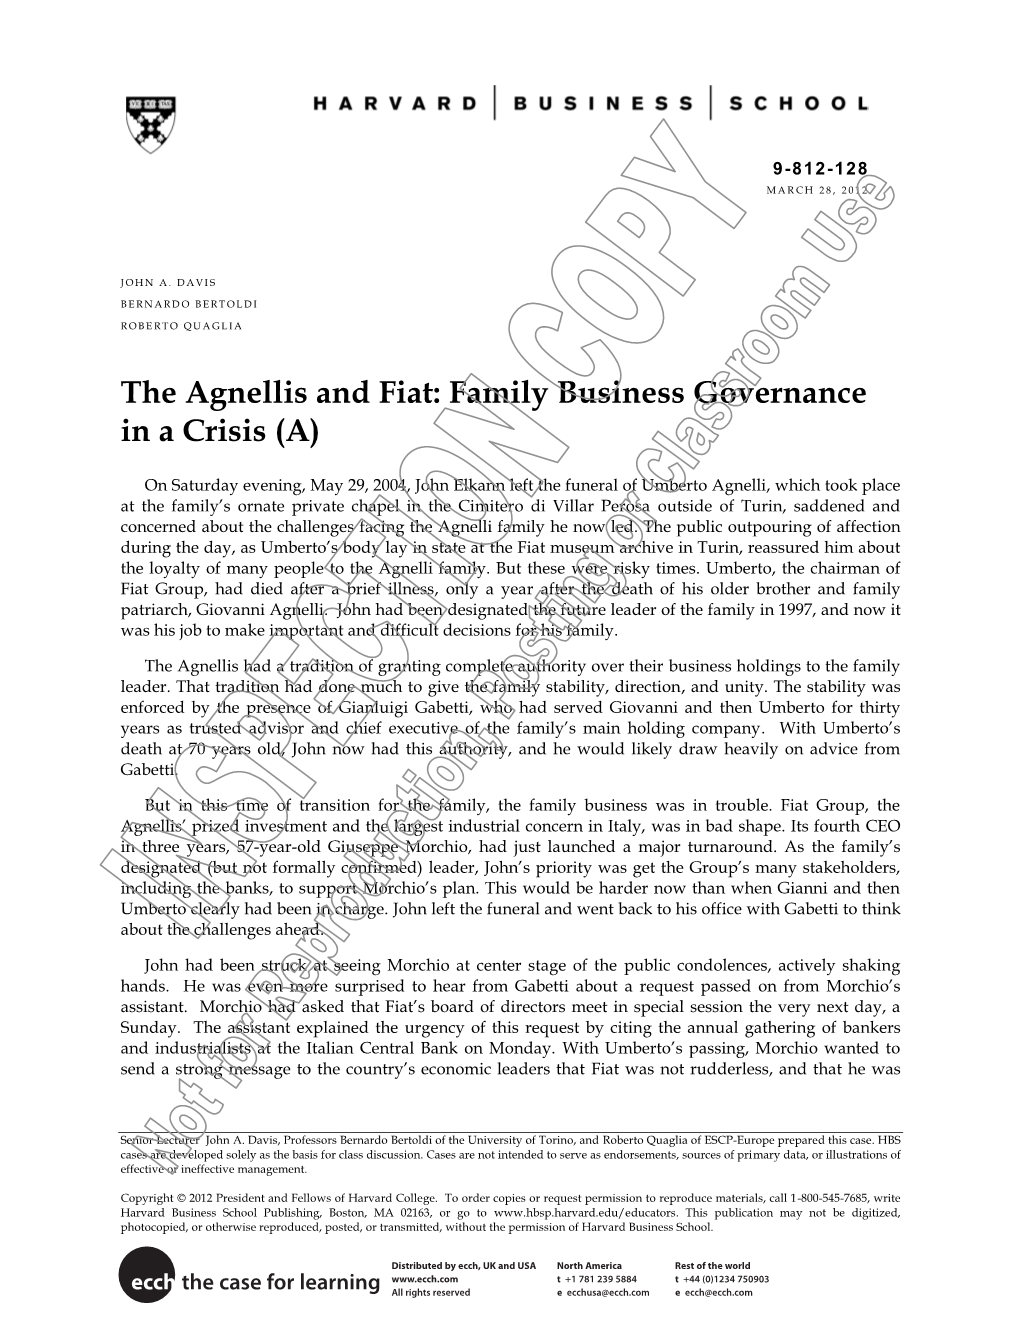 The Agnellis and Fiat: Family Business Governance in a Crisis (A)